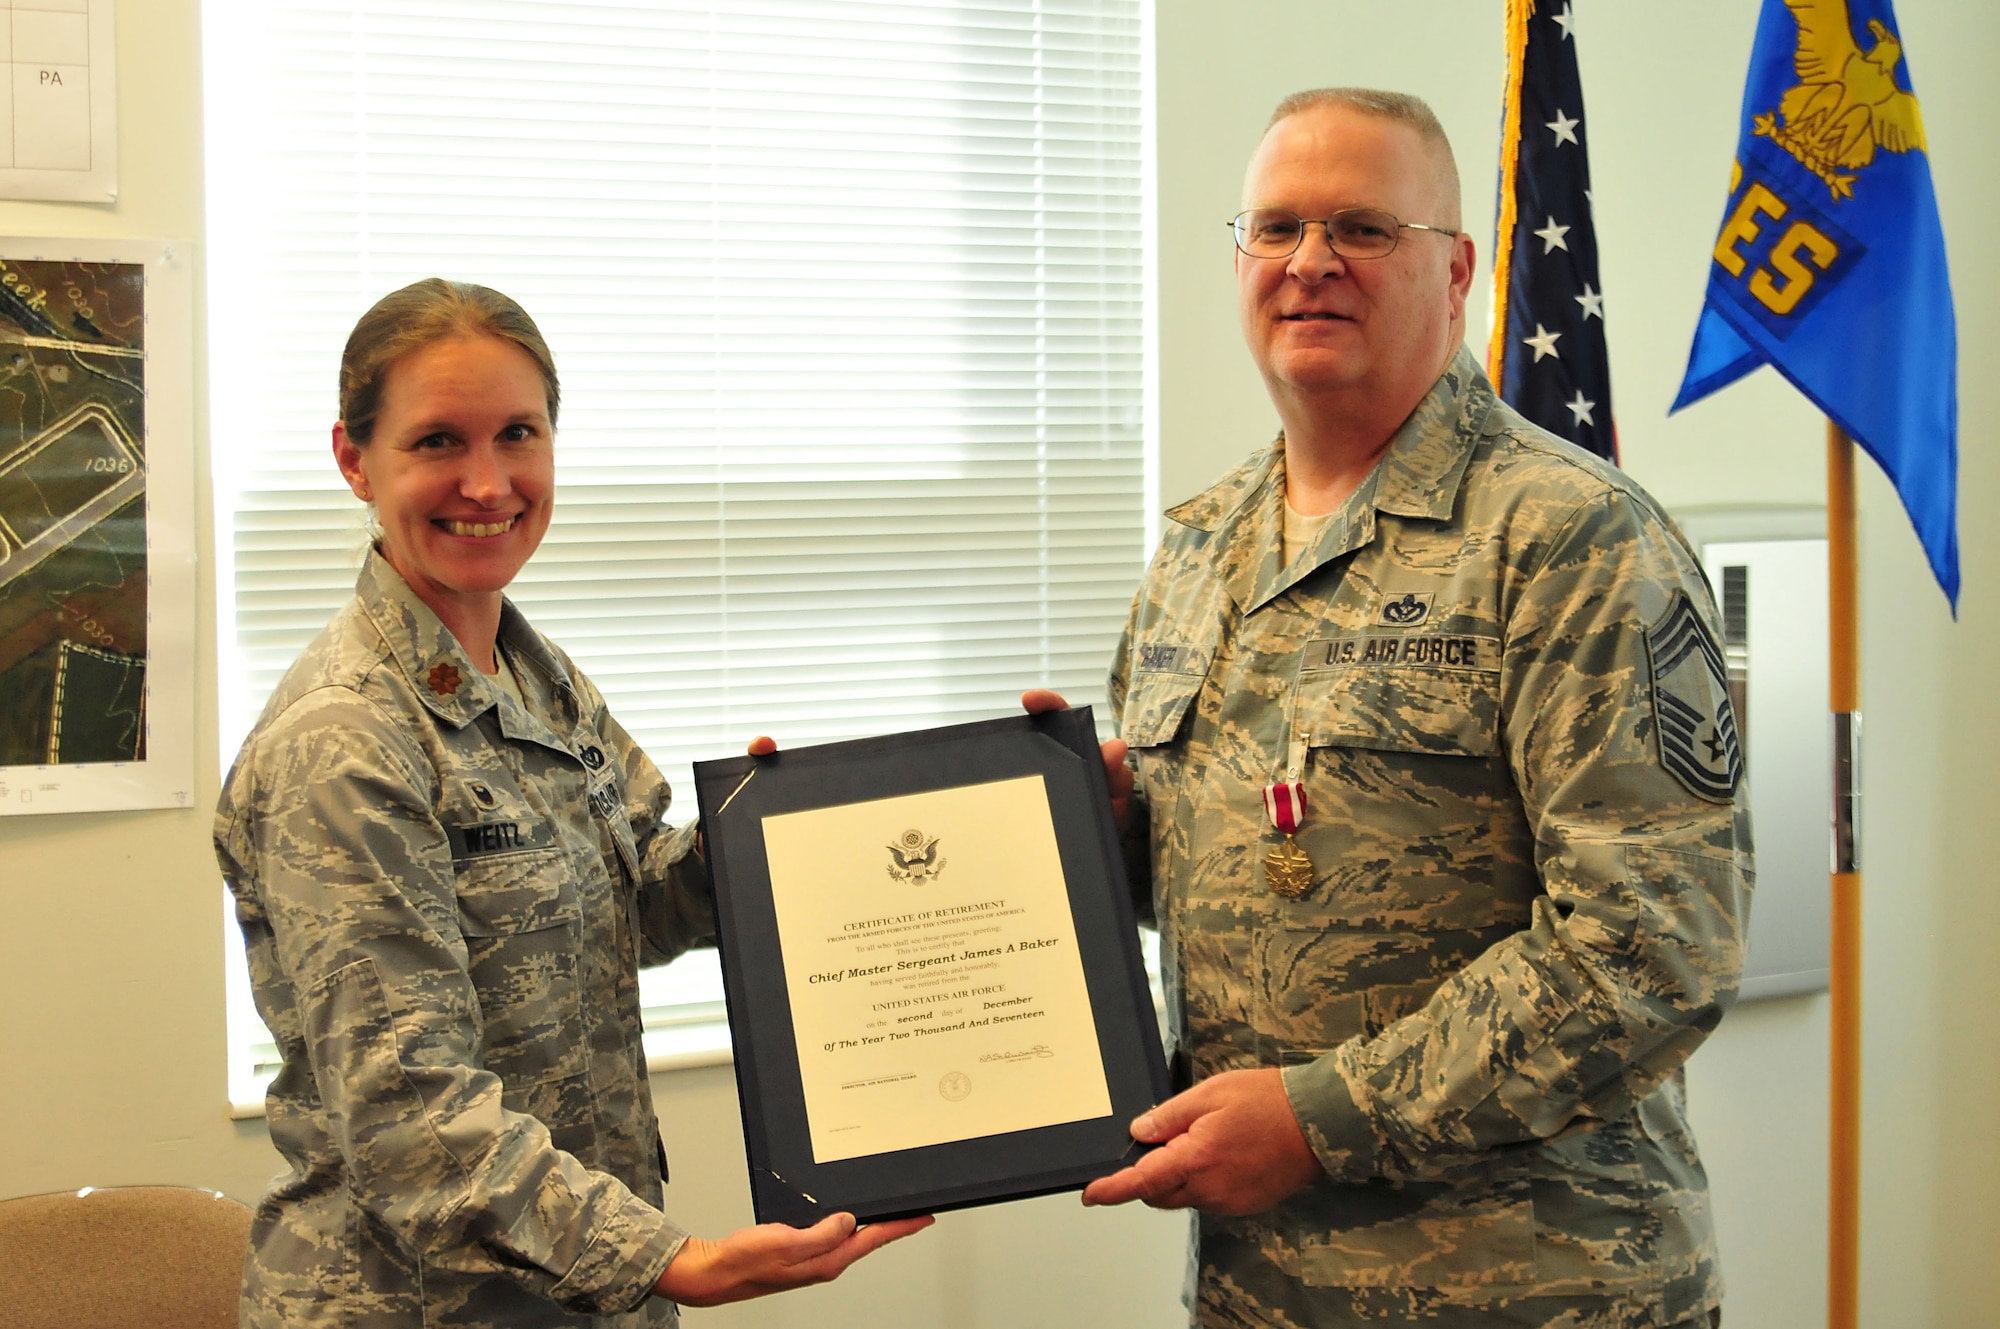 Chief Master Sgt. James Baker, the facility manager with the 178th Wing Civil Engineer Squadron (CES), celebrated his retirement at Springfield Air National Guard Base in Springfield, Ohio, Dec. 2. Baker served for 34 years in the Ohio Air National Guard.